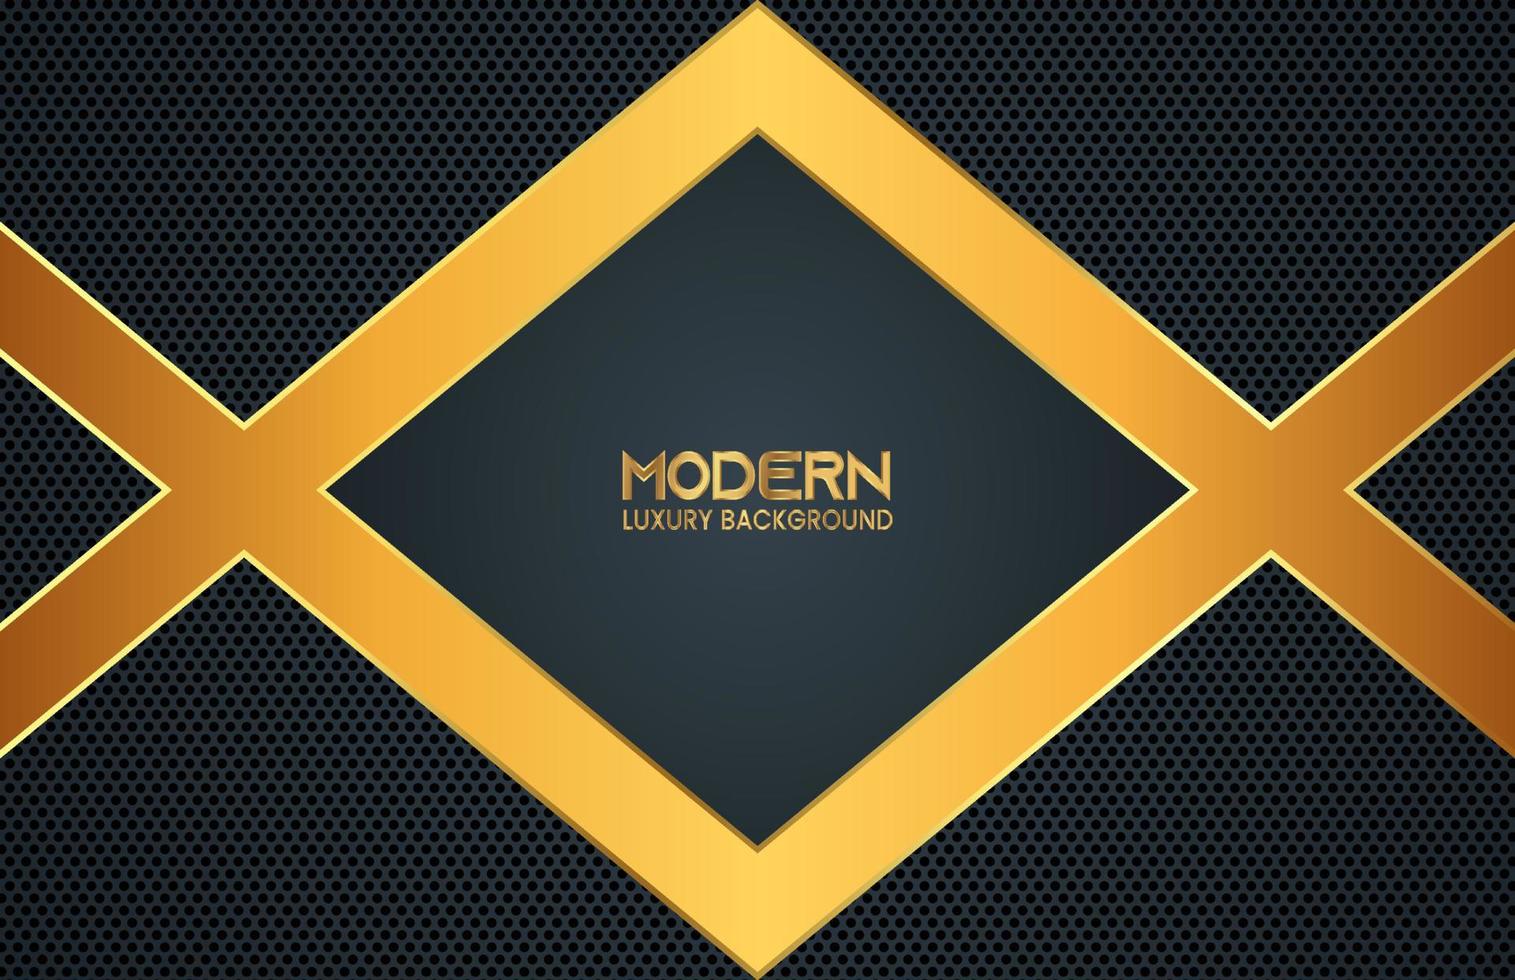 Luxury Abstract Modern Technology Background with Shiny Golden Lines and Dot Pattern vector